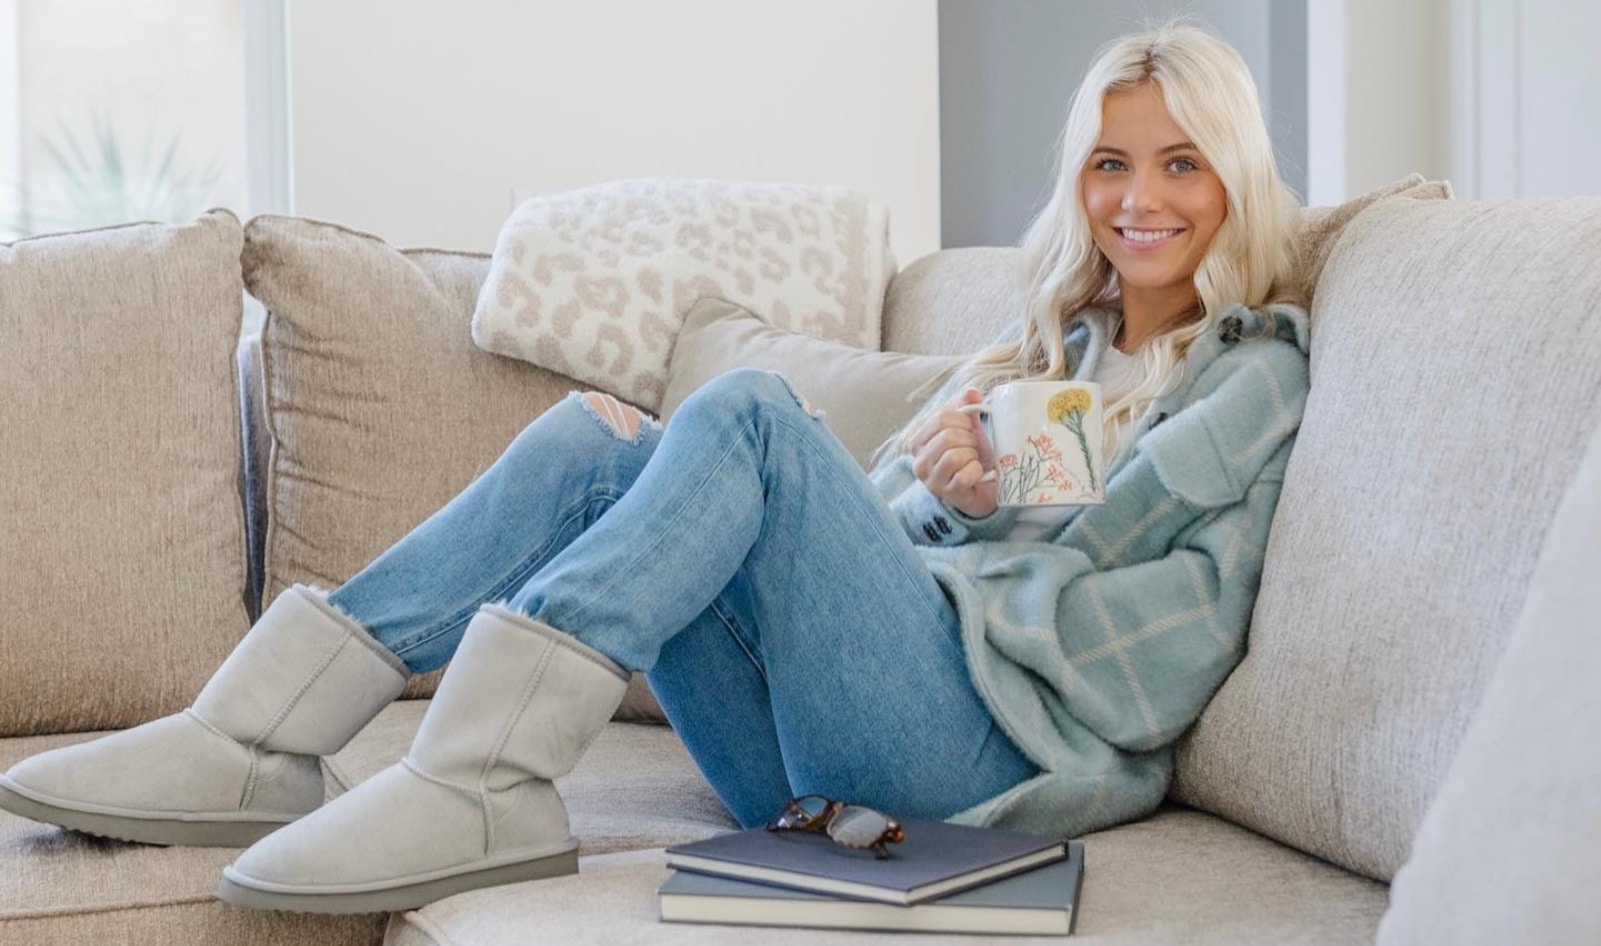 8 Vegan Ugg Boots to Keep Your Feet Comfy, Cozy, and Cruelty-Free | VegNews